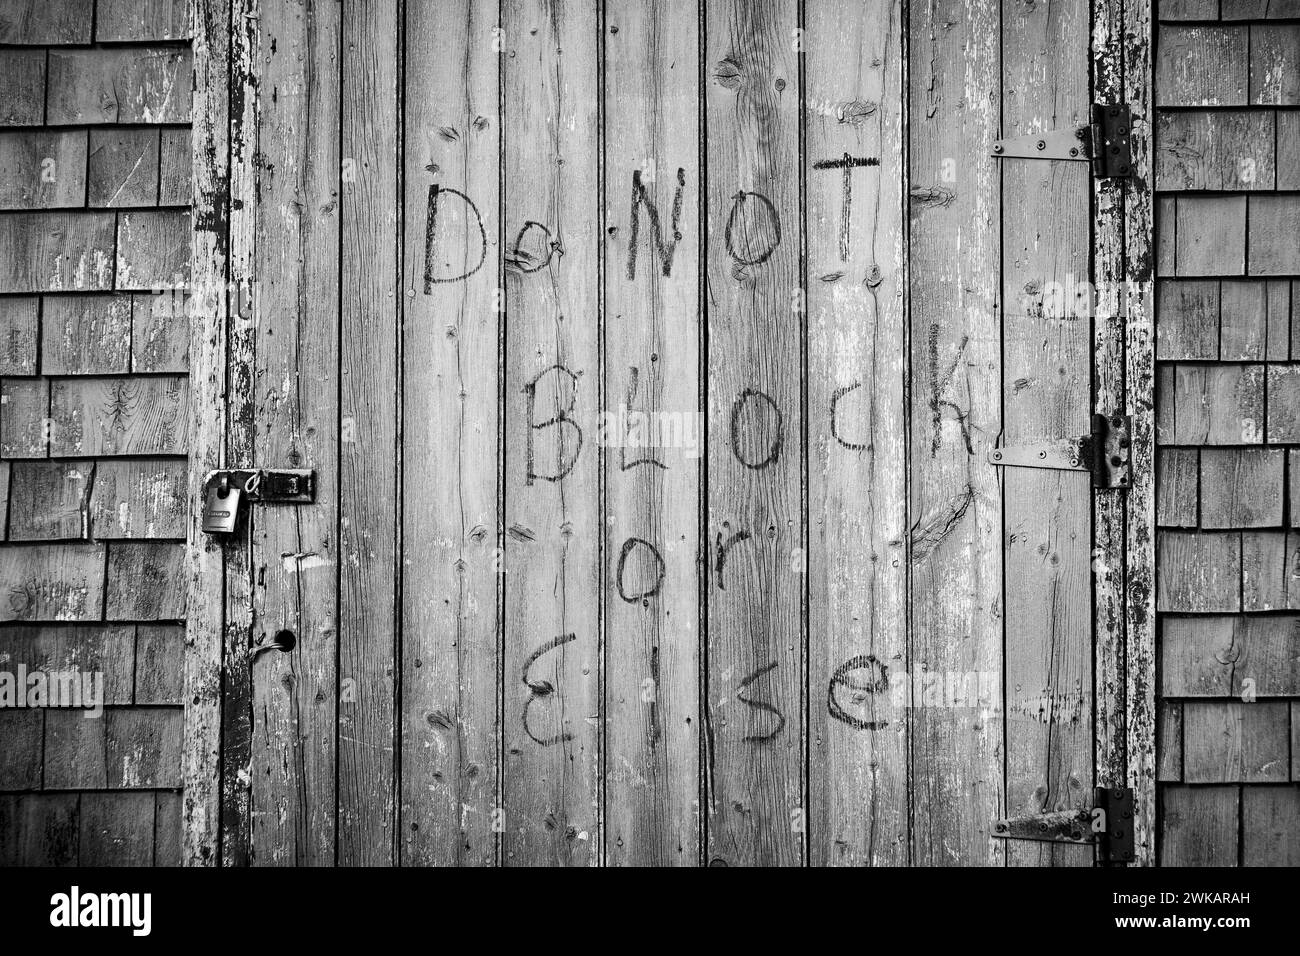 Locked shed door bearing the threat 'Do not block or else'. Stock Photo